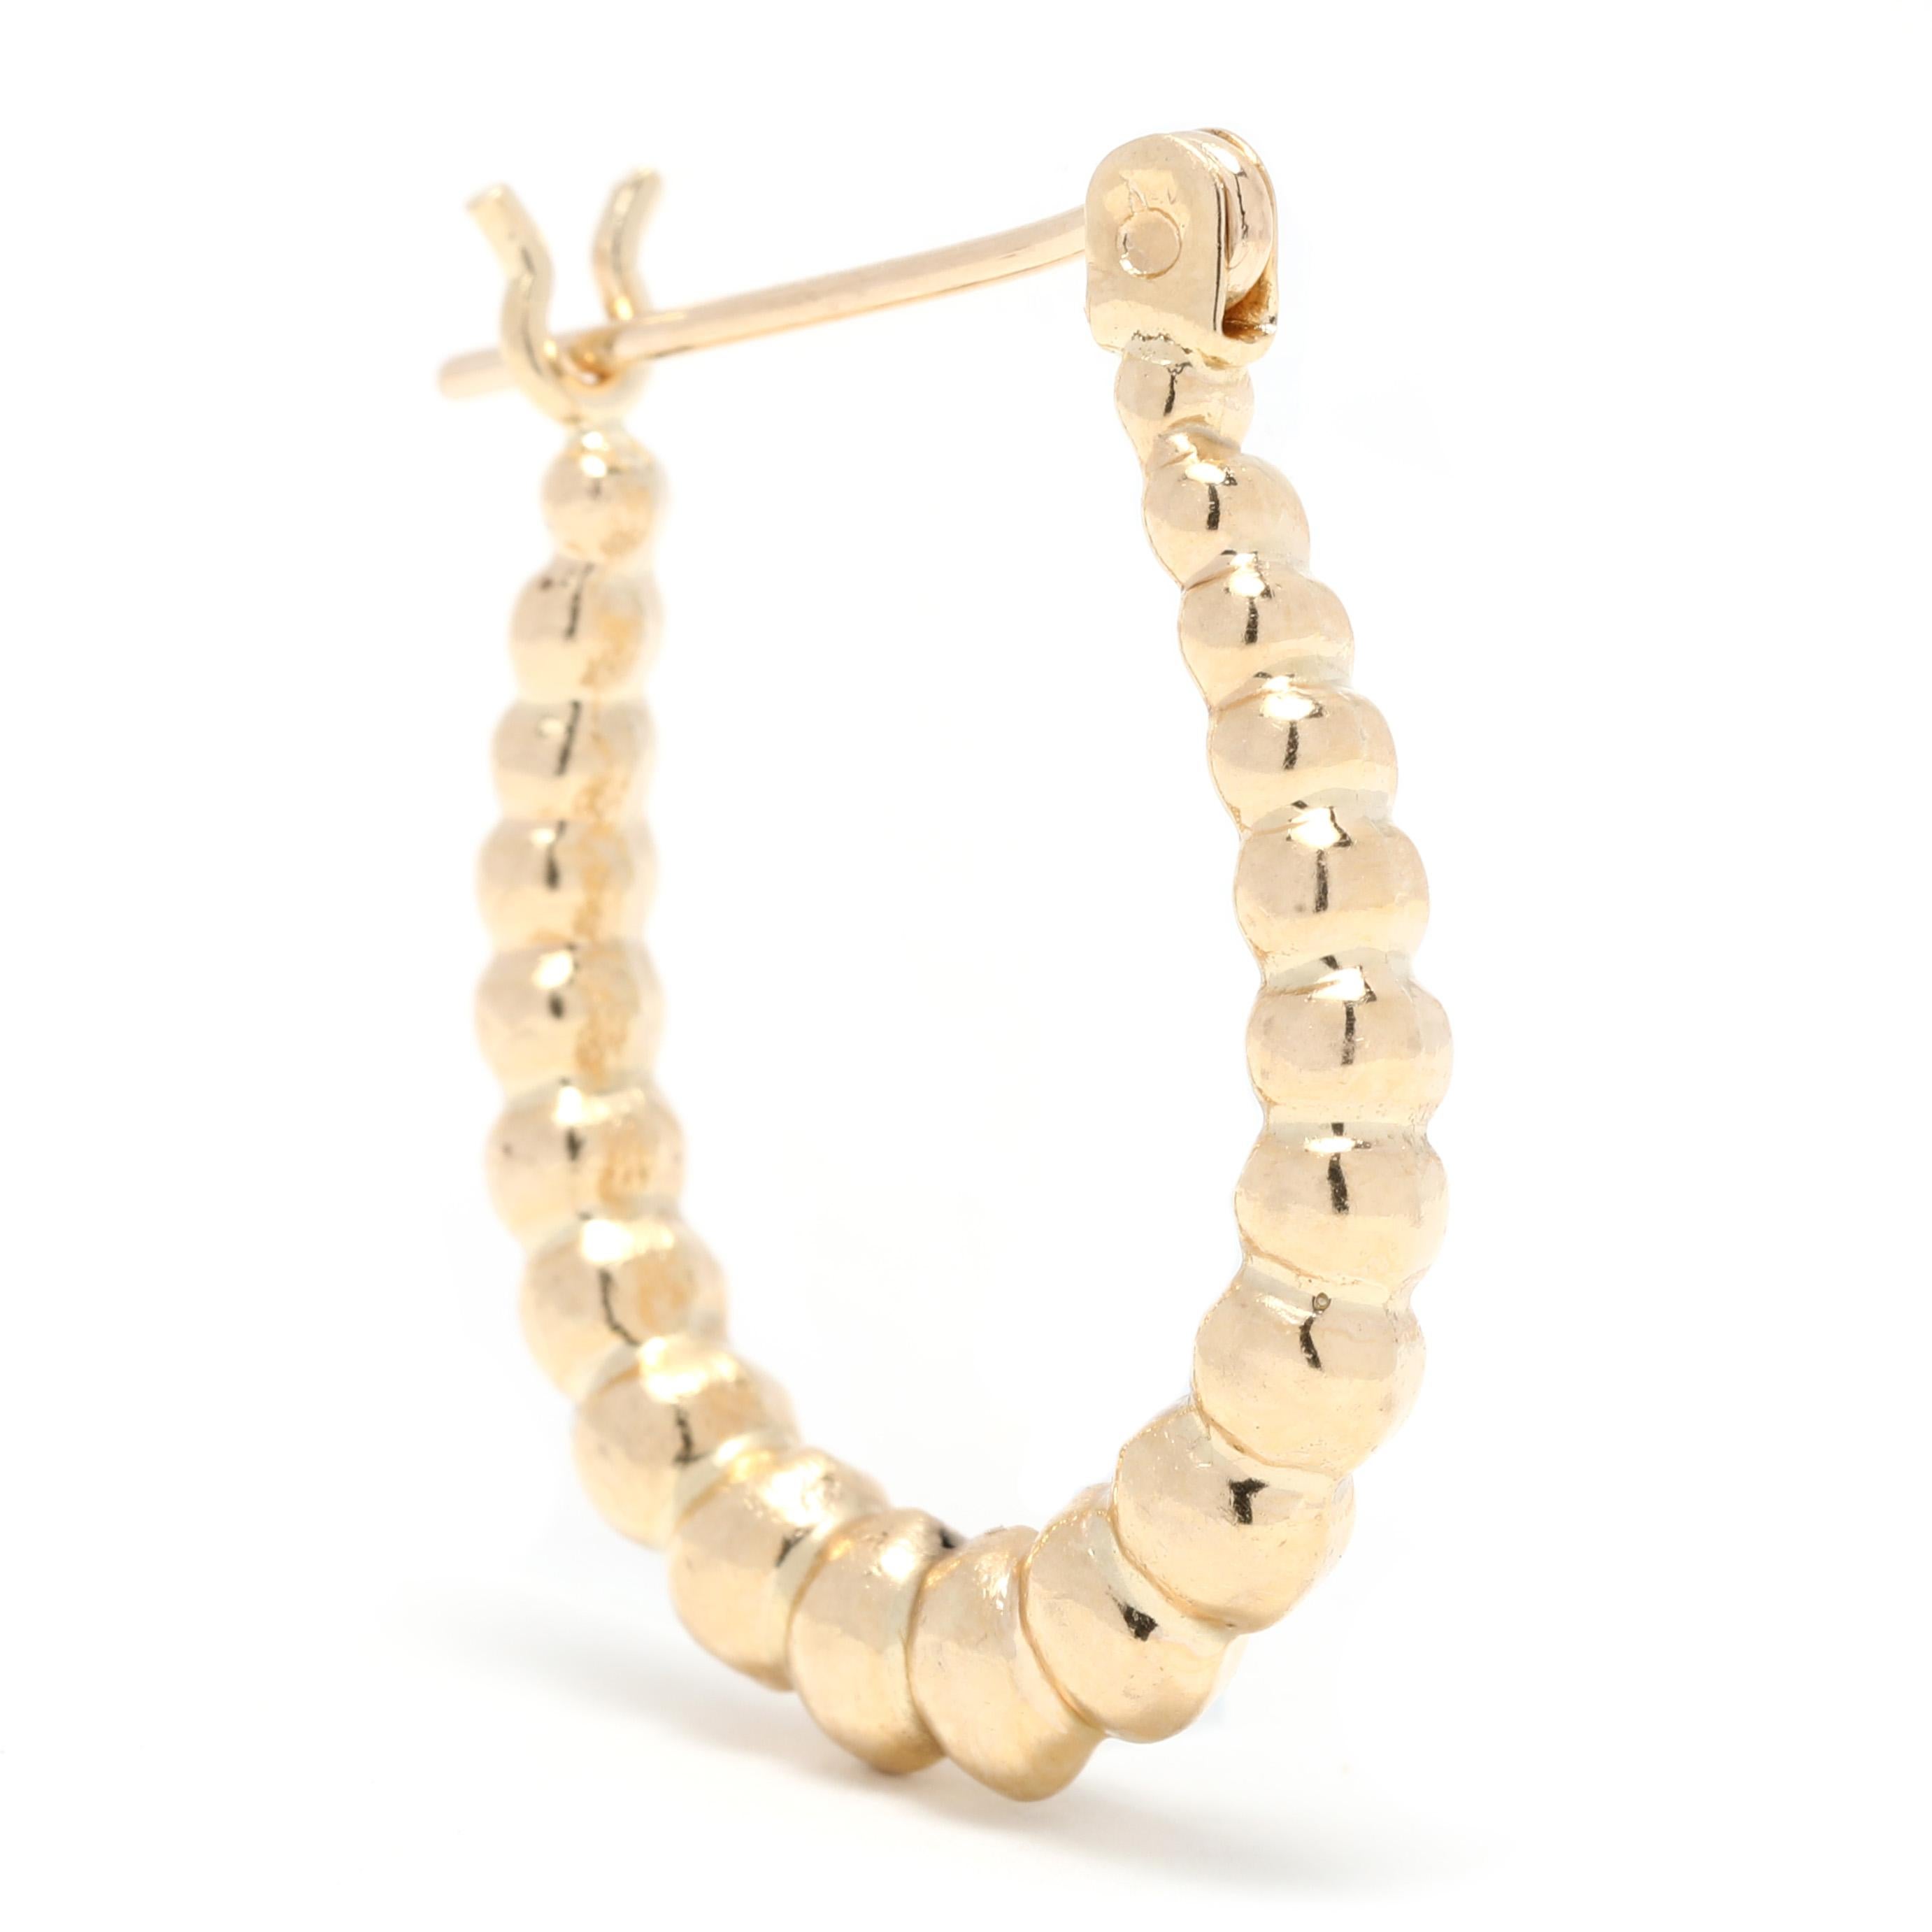 These small gold bubble hoop earrings are a perfect everyday accessory. Crafted in 14K yellow gold and measuring 3/4 inch in length, these fancy gold hoops are lightweight and comfortable to wear. A great addition to your jewelry collection, these